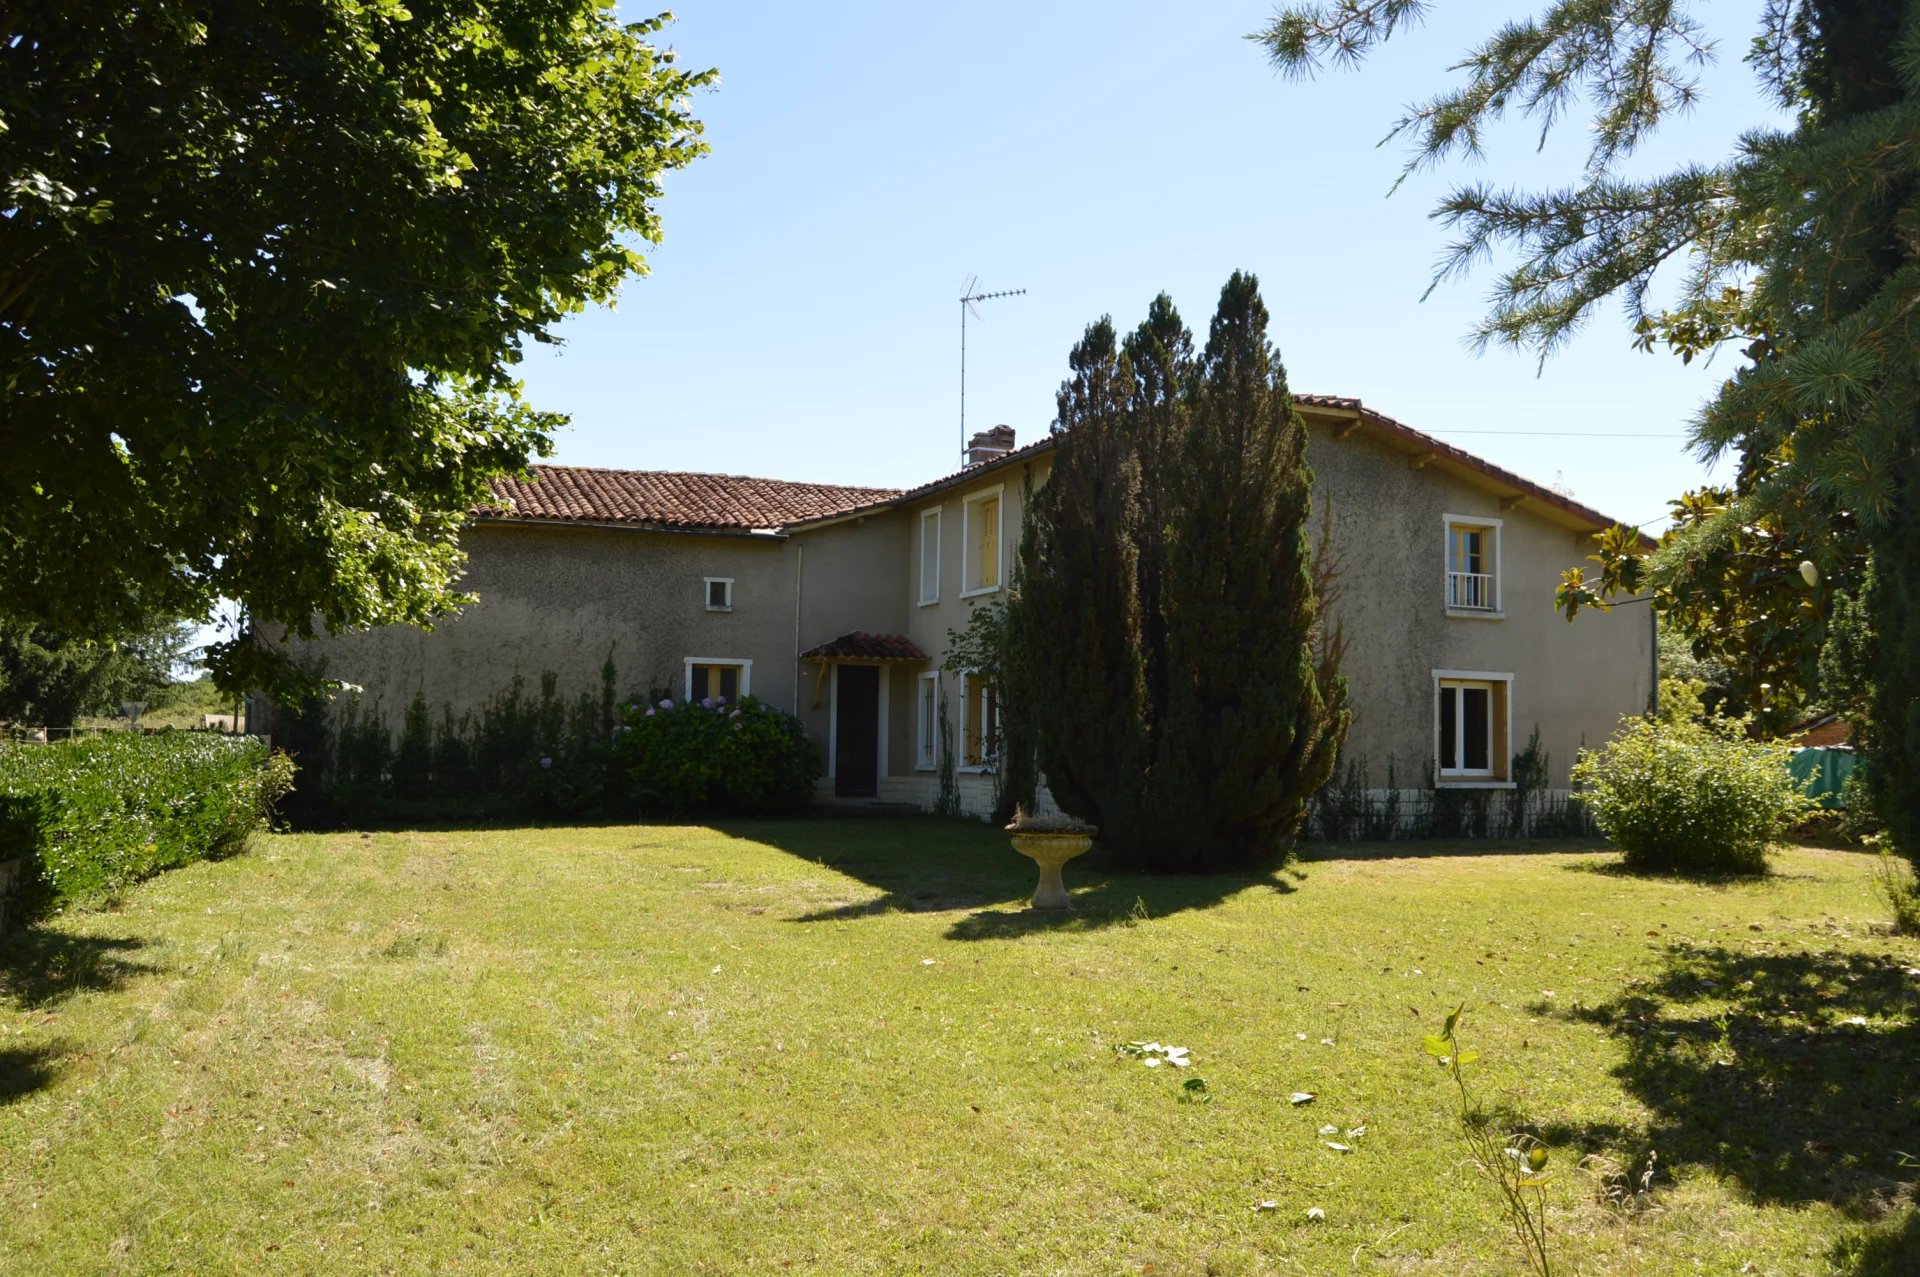 6 bed country property with large barn, 1684m² of land, just 5 min from Ruffec